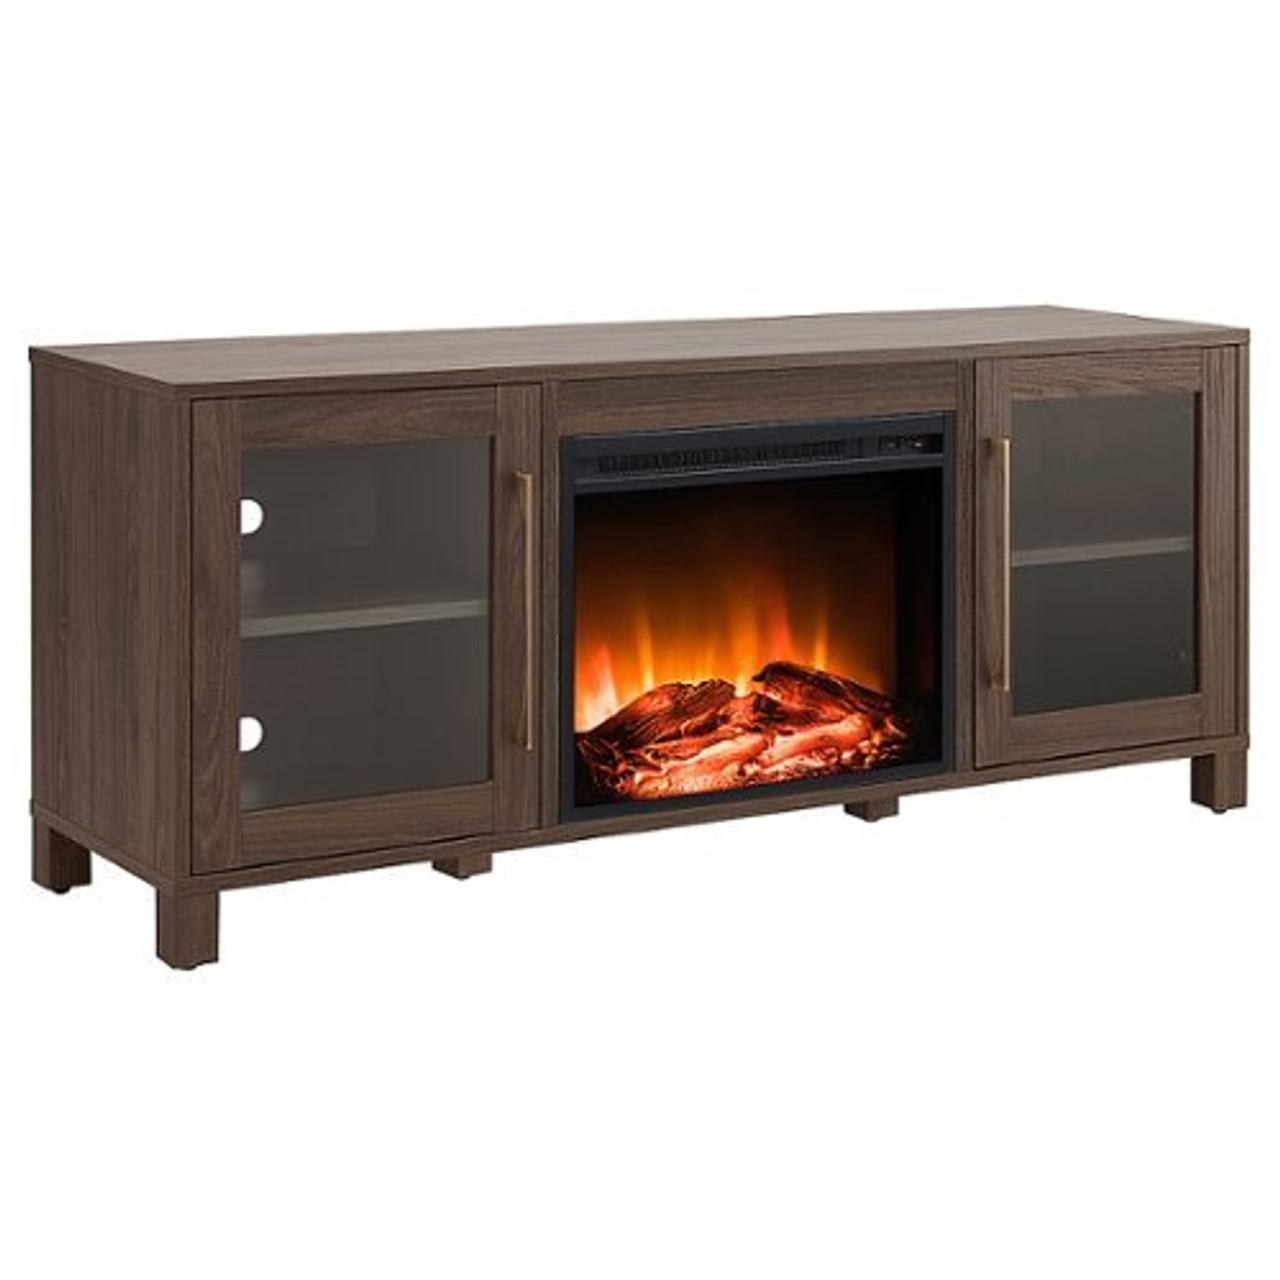 Camden&Wells - Quincy Crystal Fireplace TV Stand for TVs up to 65" - Alder Brown